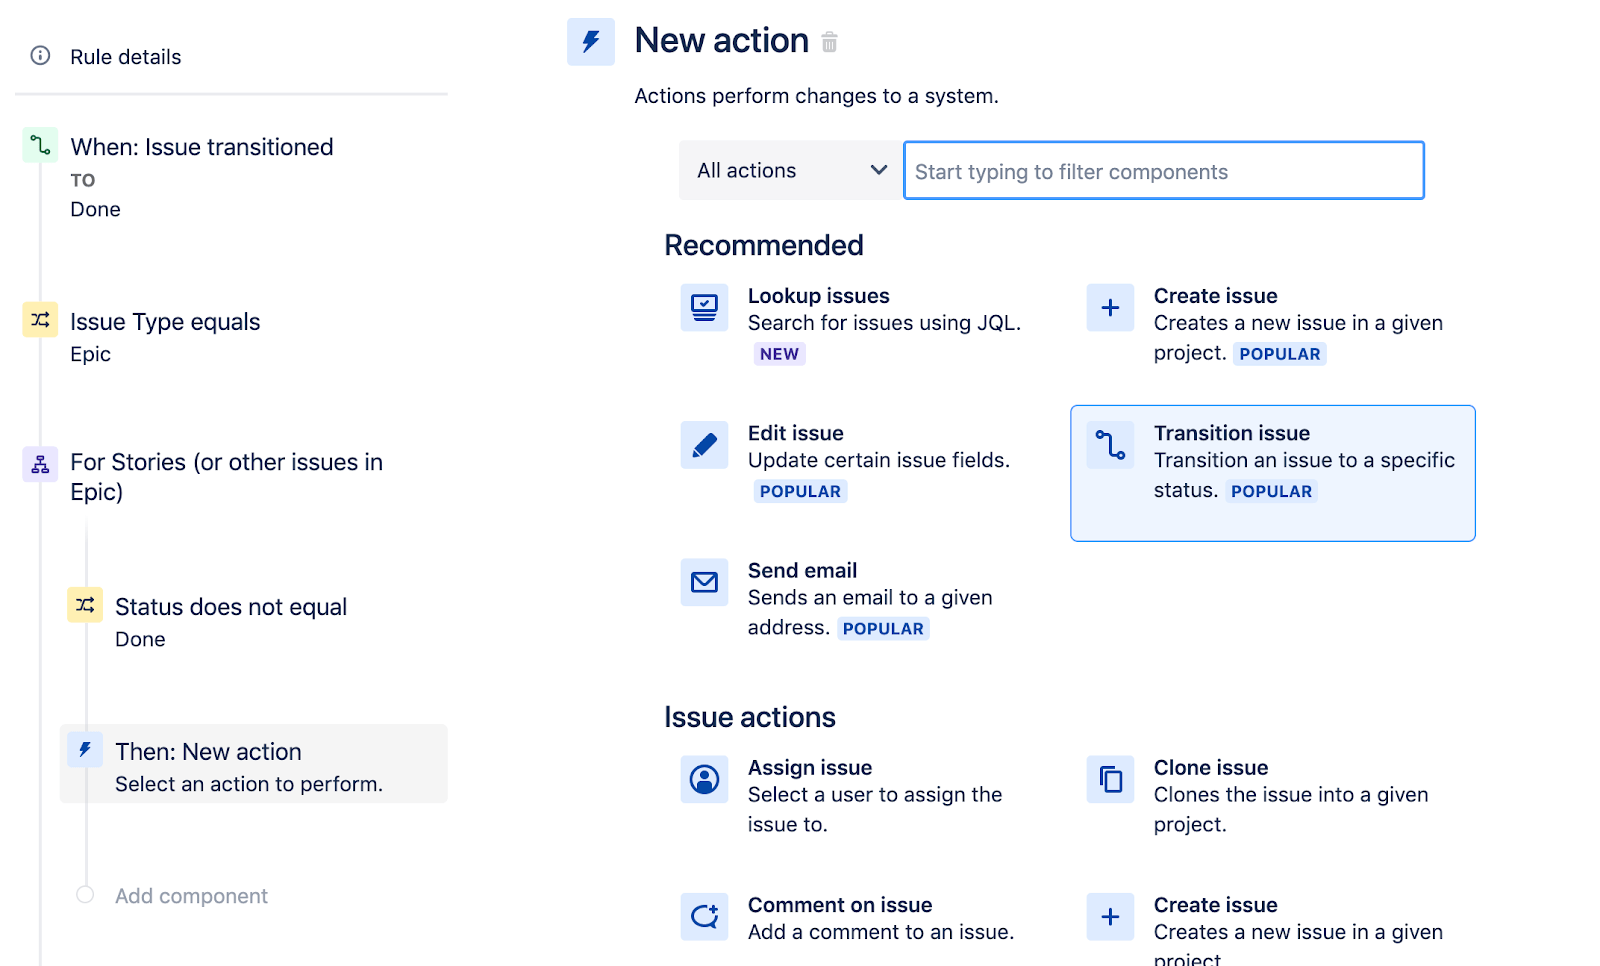 Selecting Transition Issue as a New Action